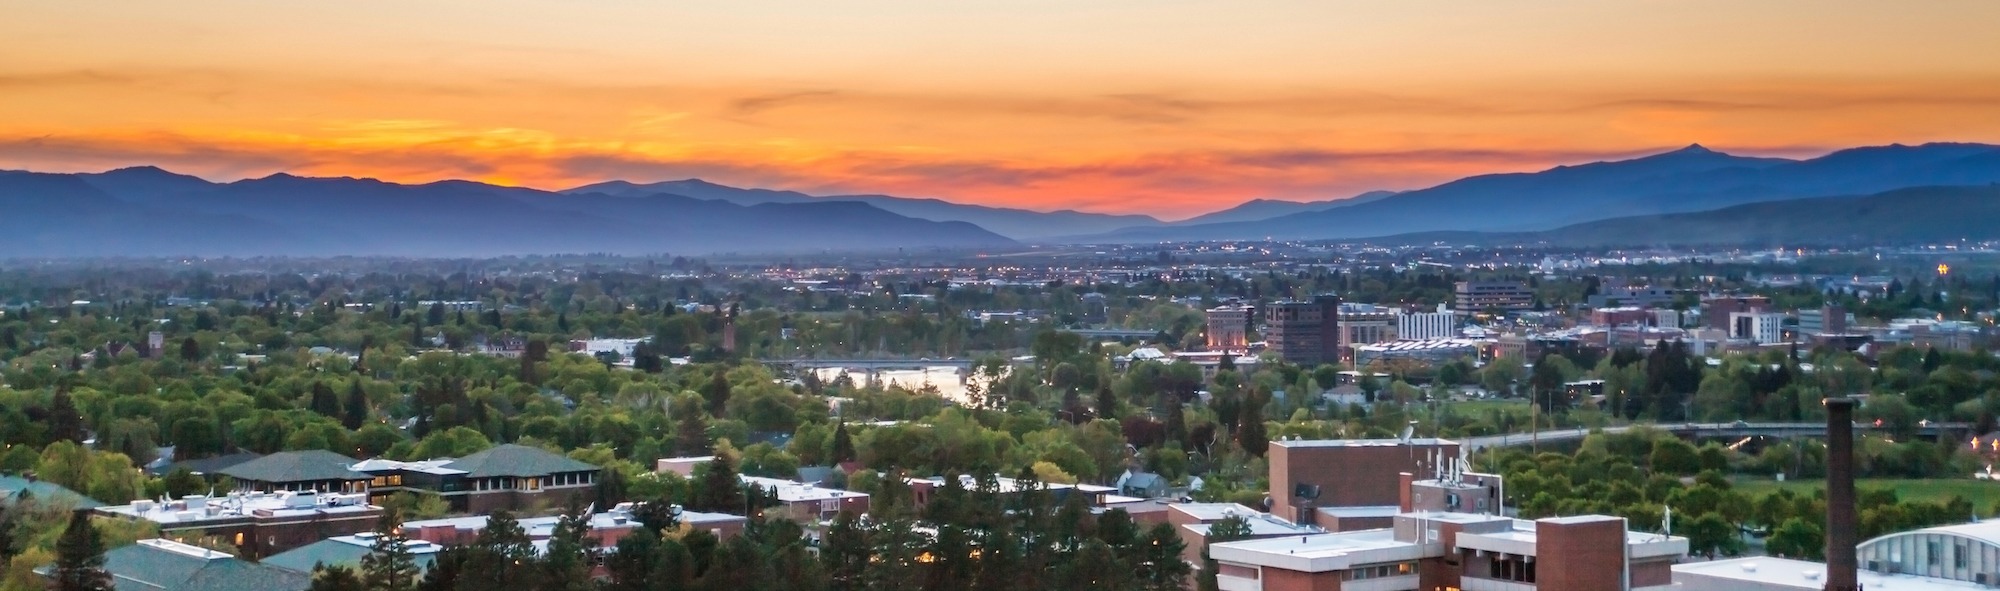 Spectacular Summer Sunsets in Missoula